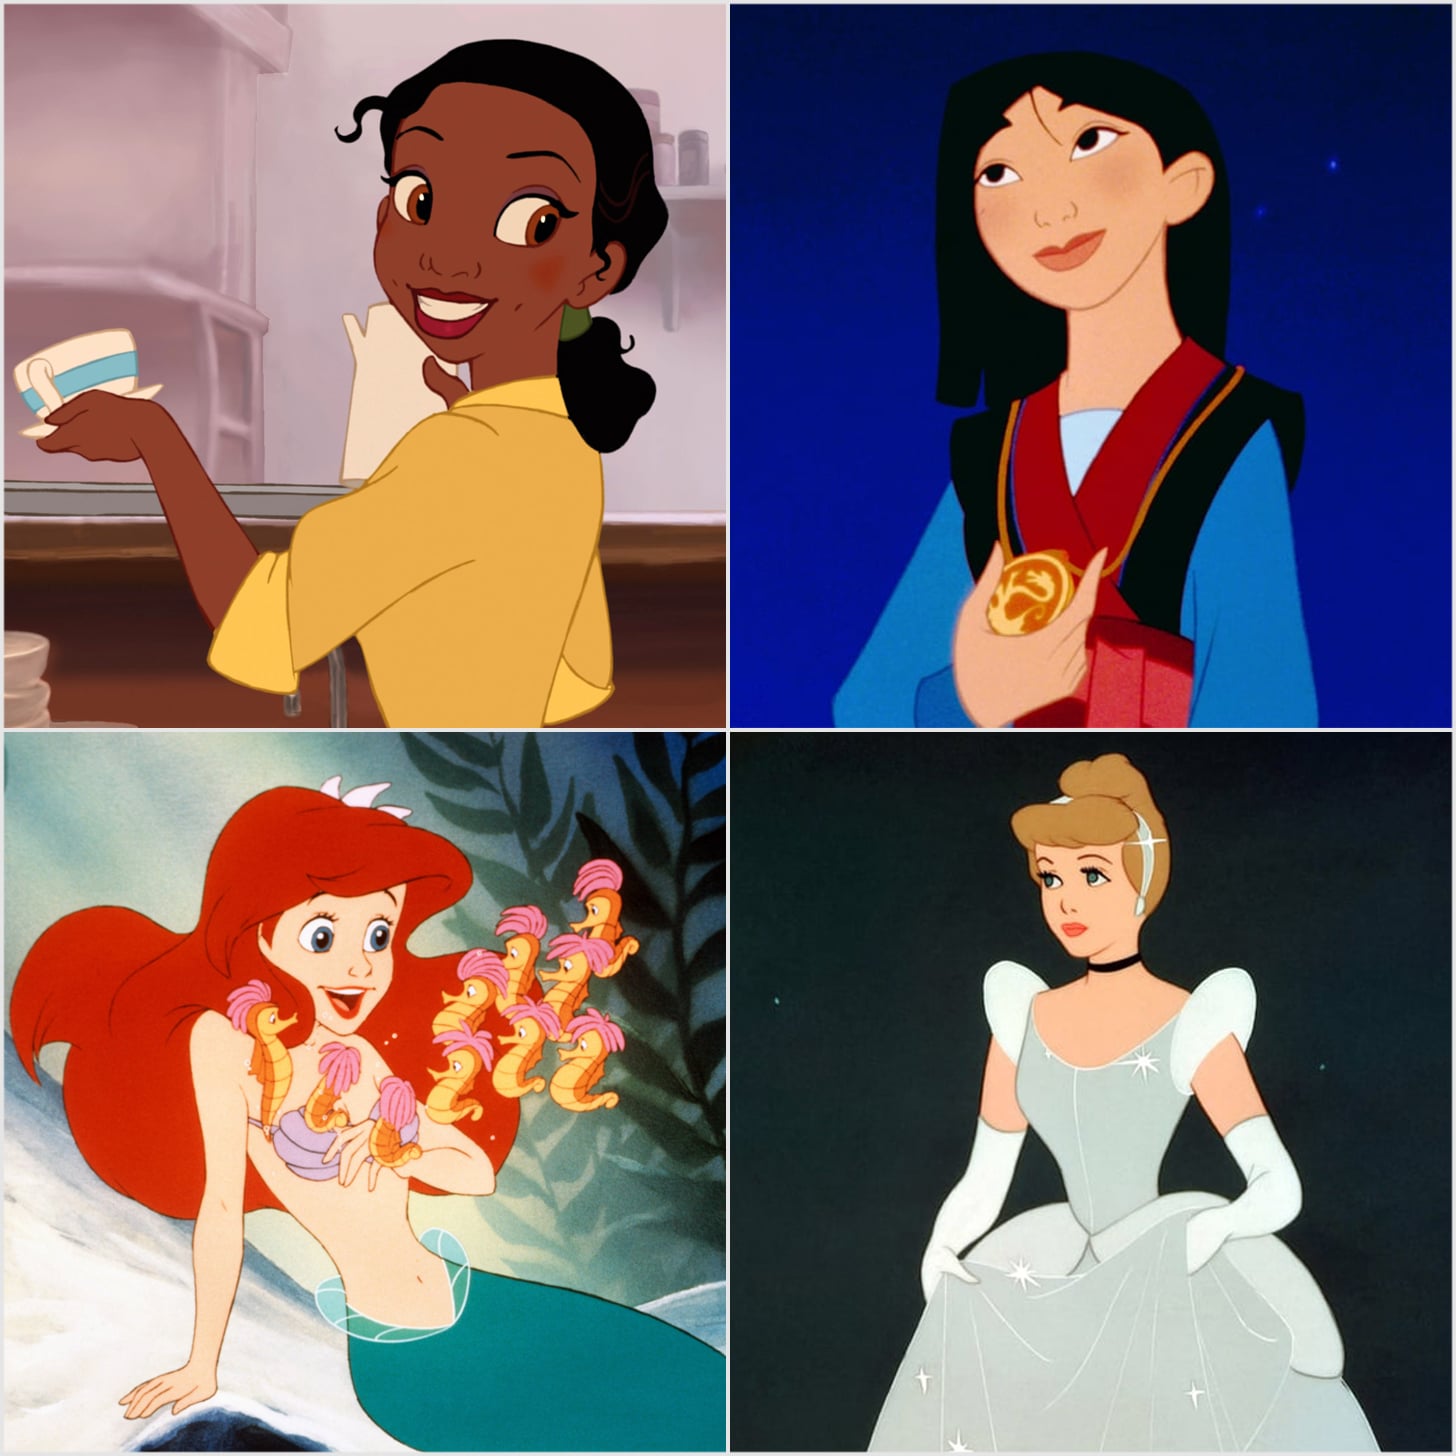 Disney Princess Facts on X: Who are your 'Big 3' Disney